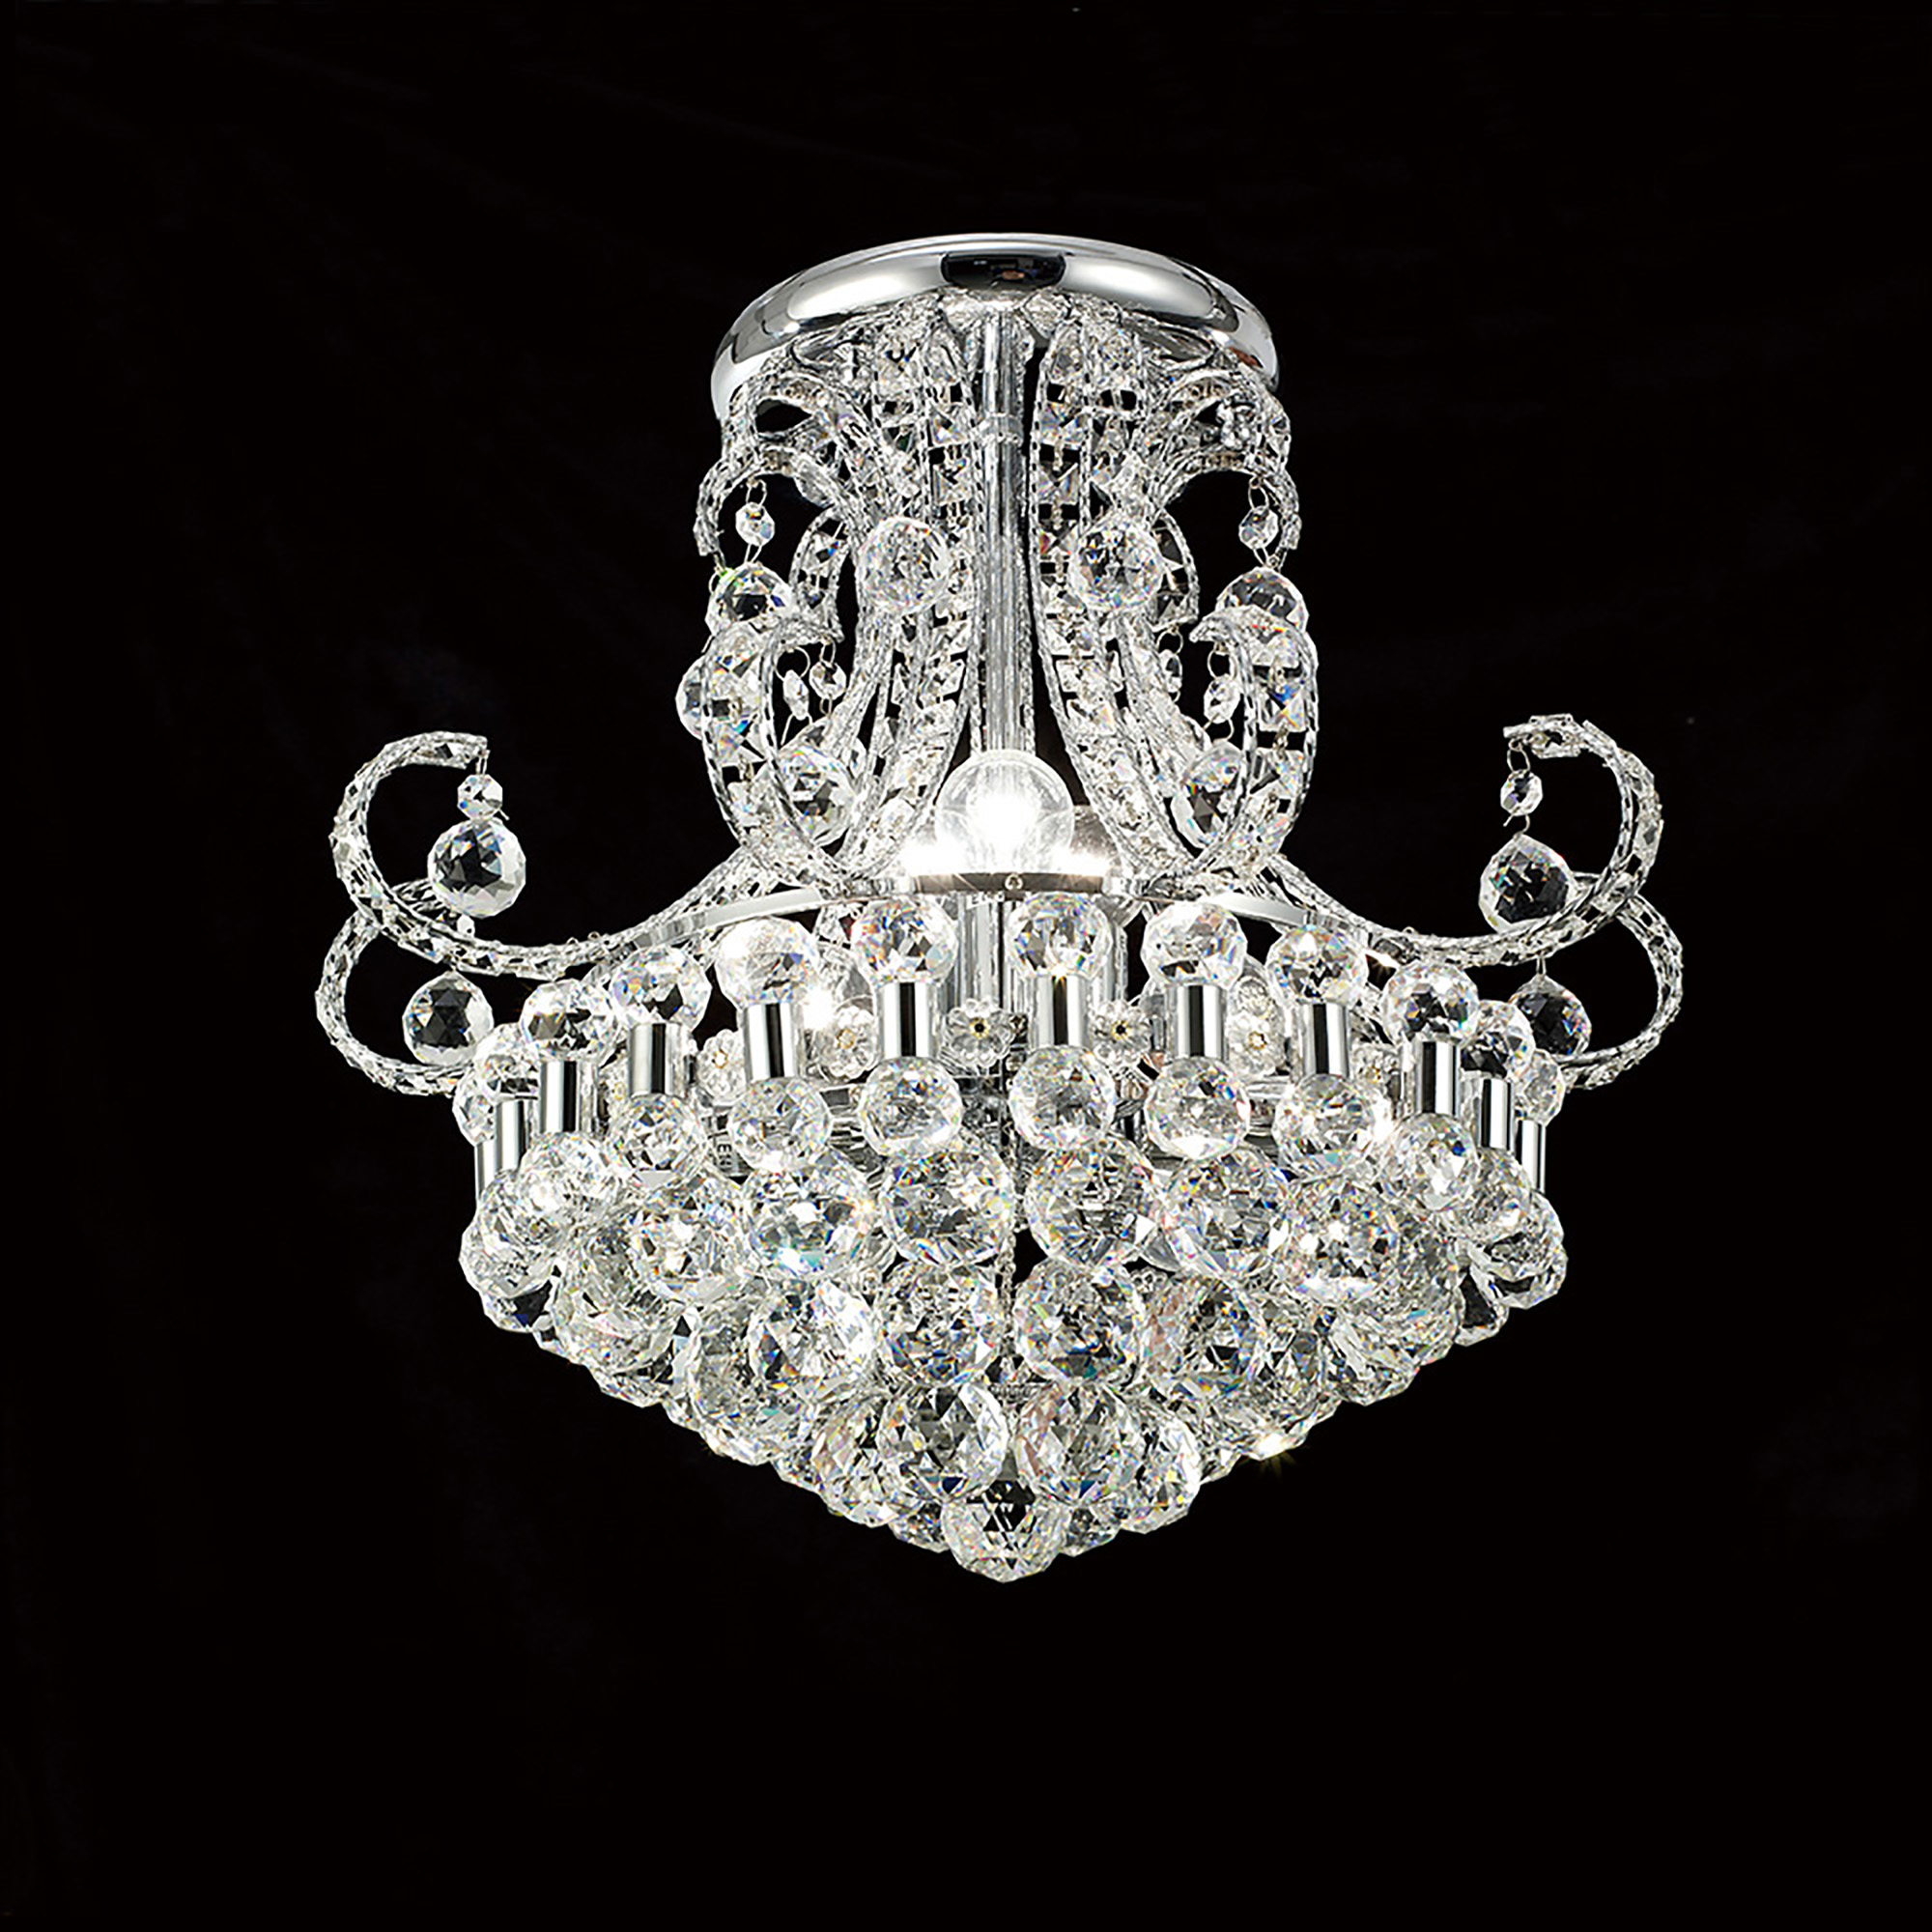 IL30026  Pearl Crystal Chandelier 9 Light Polished Chrome